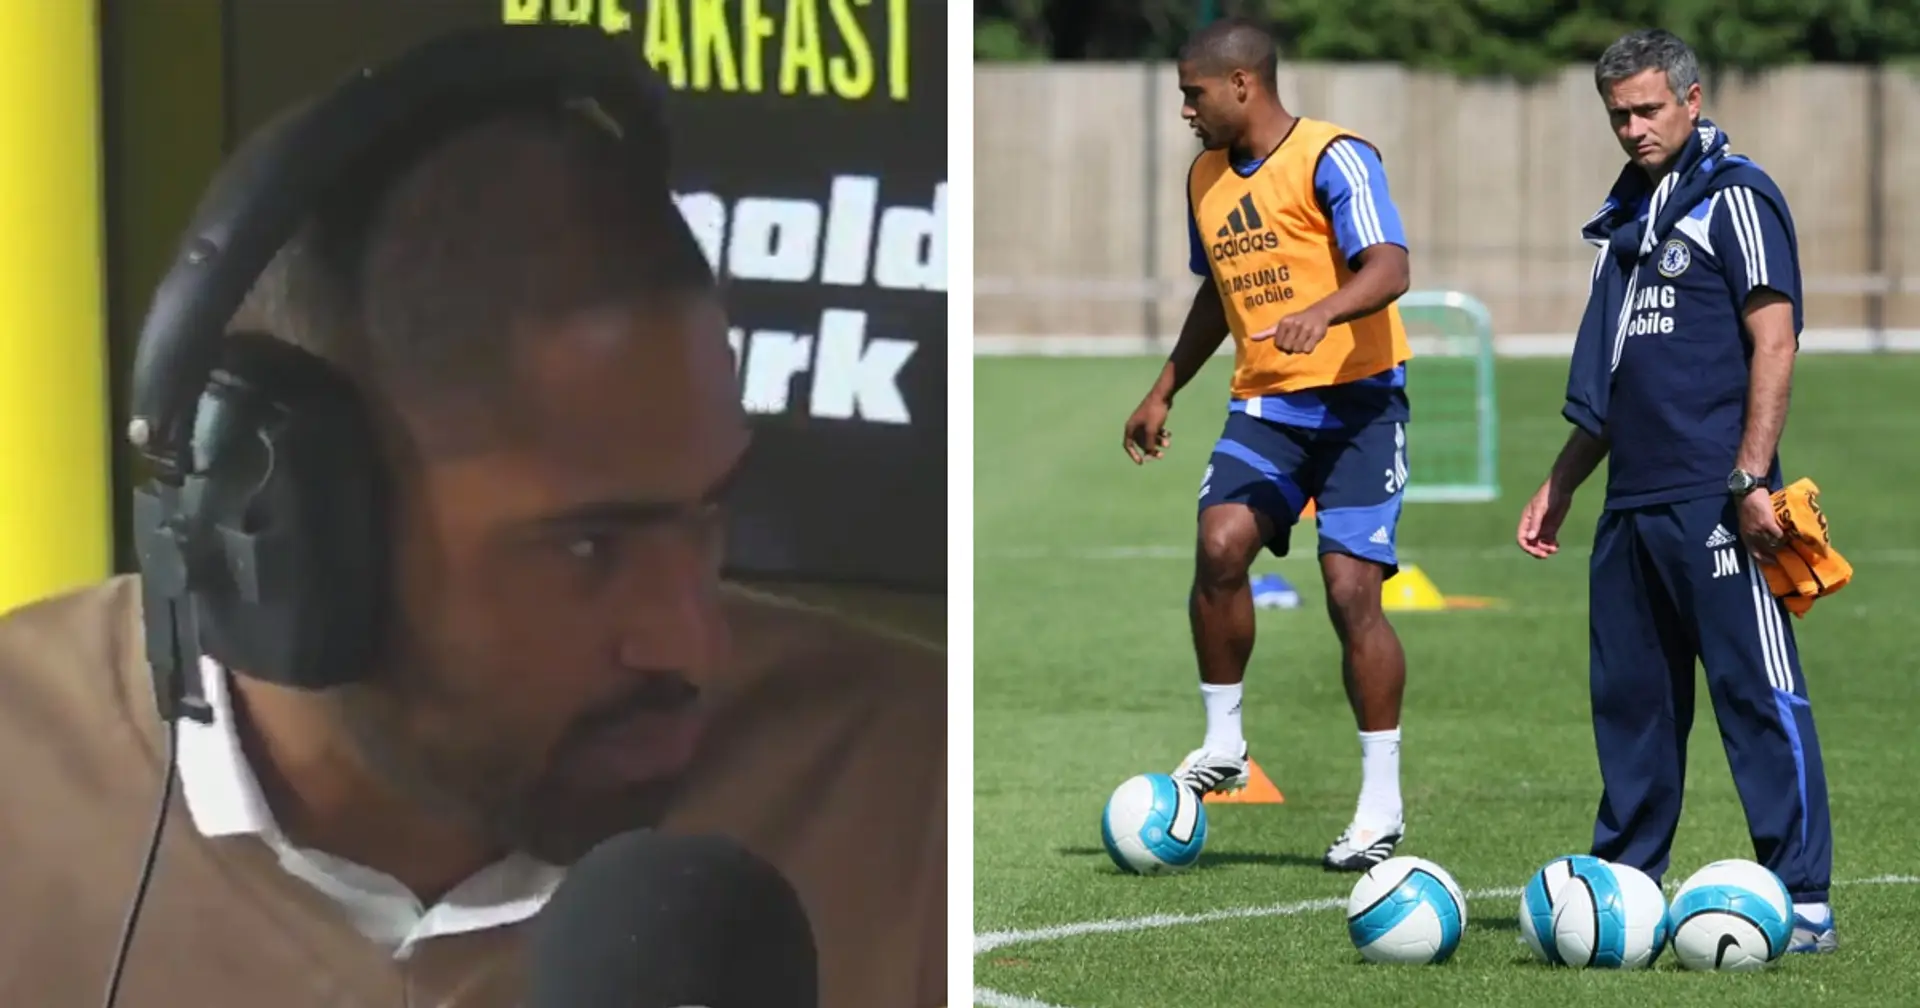 'He ripped the contract up in front of me': Glen Johnson reveals how Jose Mourinho blocked his move to Lyon in 2006